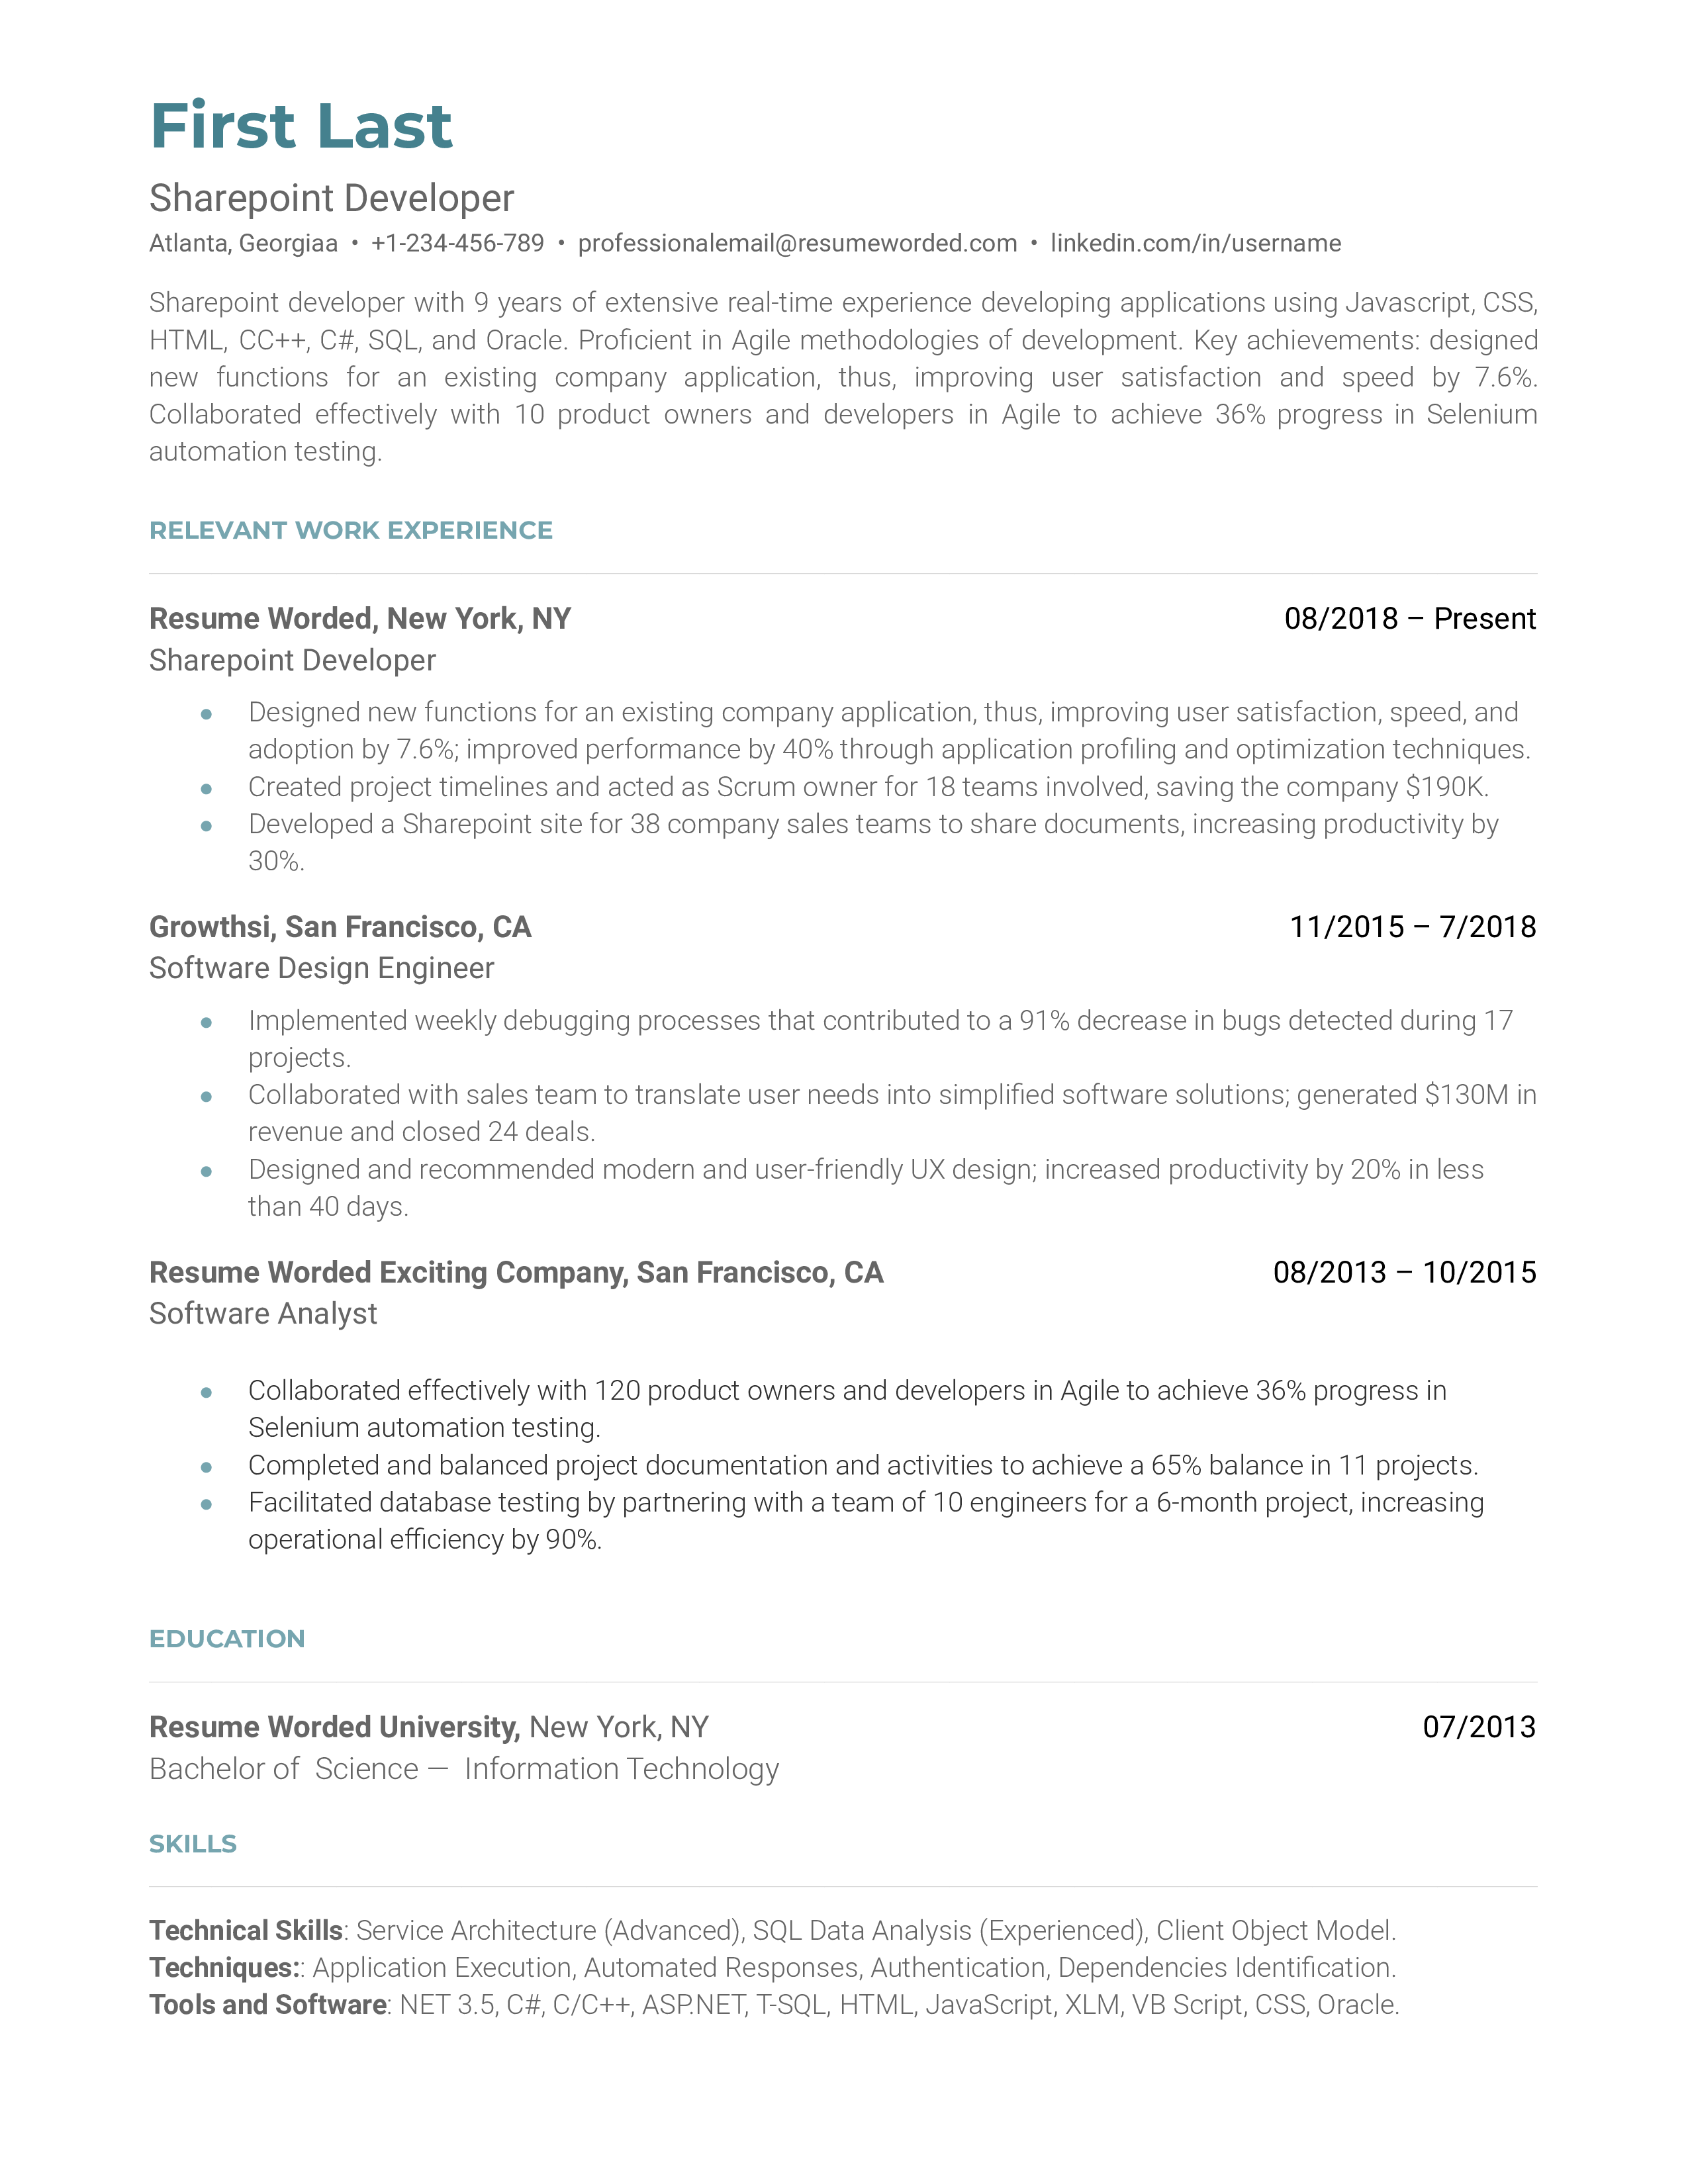 SharePoint Developer CV displaying technical skills and project management experience.